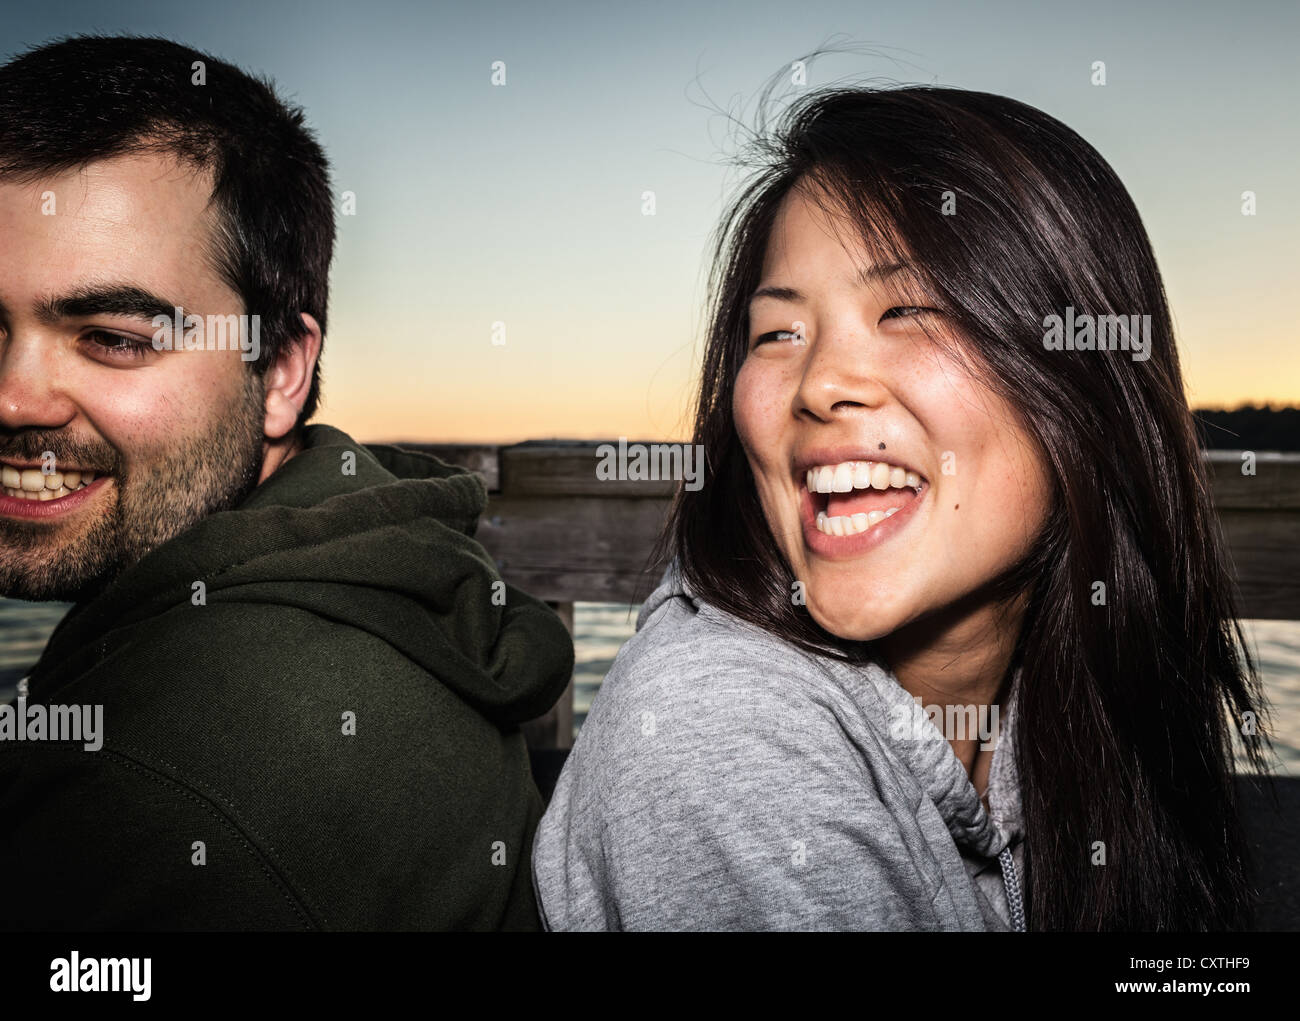 Couple smiling together outdoors Banque D'Images